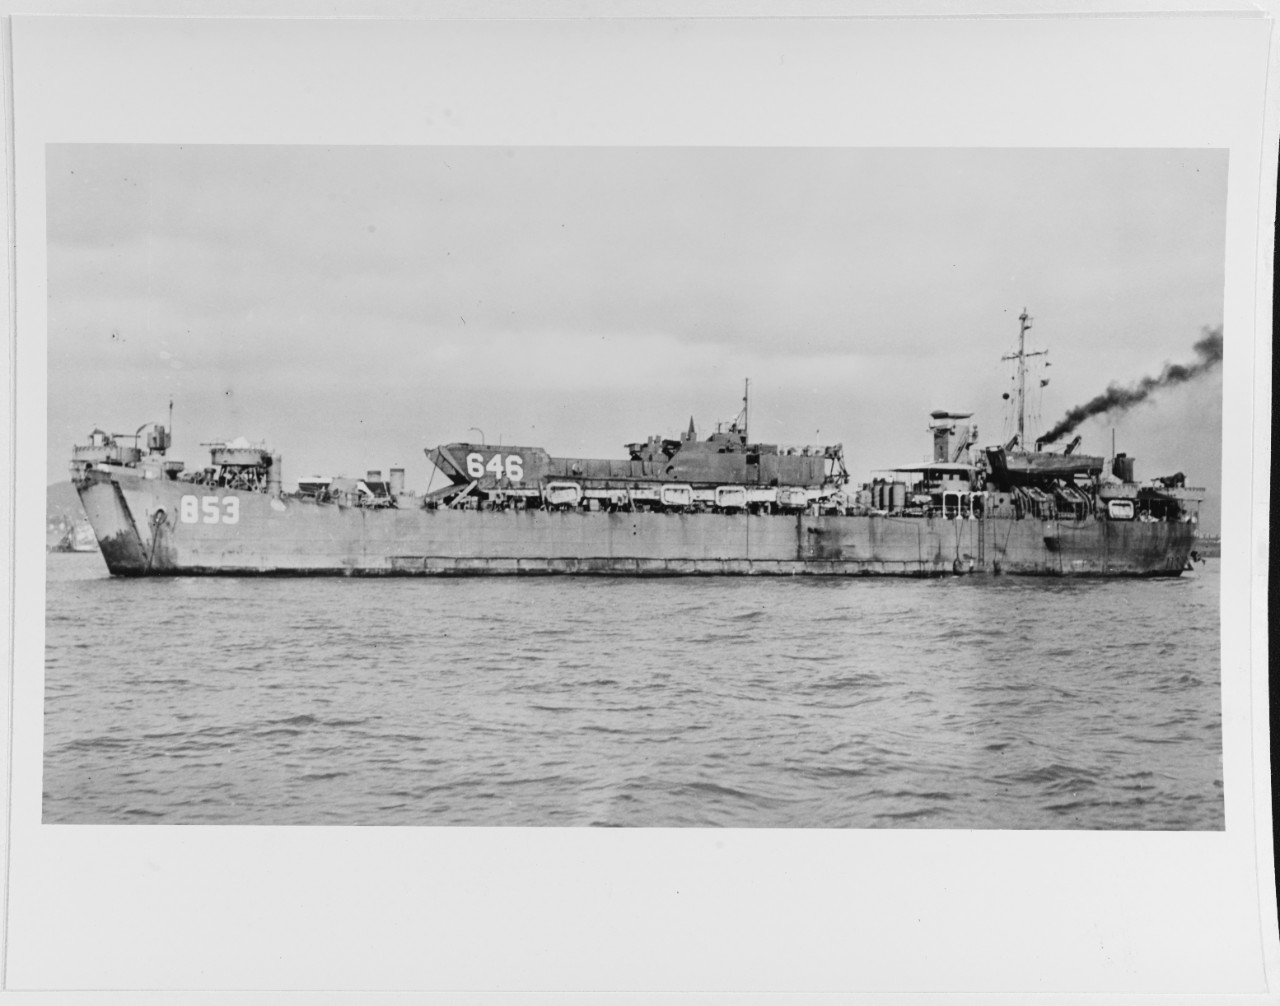 USS LST - 853 (later: KANE COUNTY)